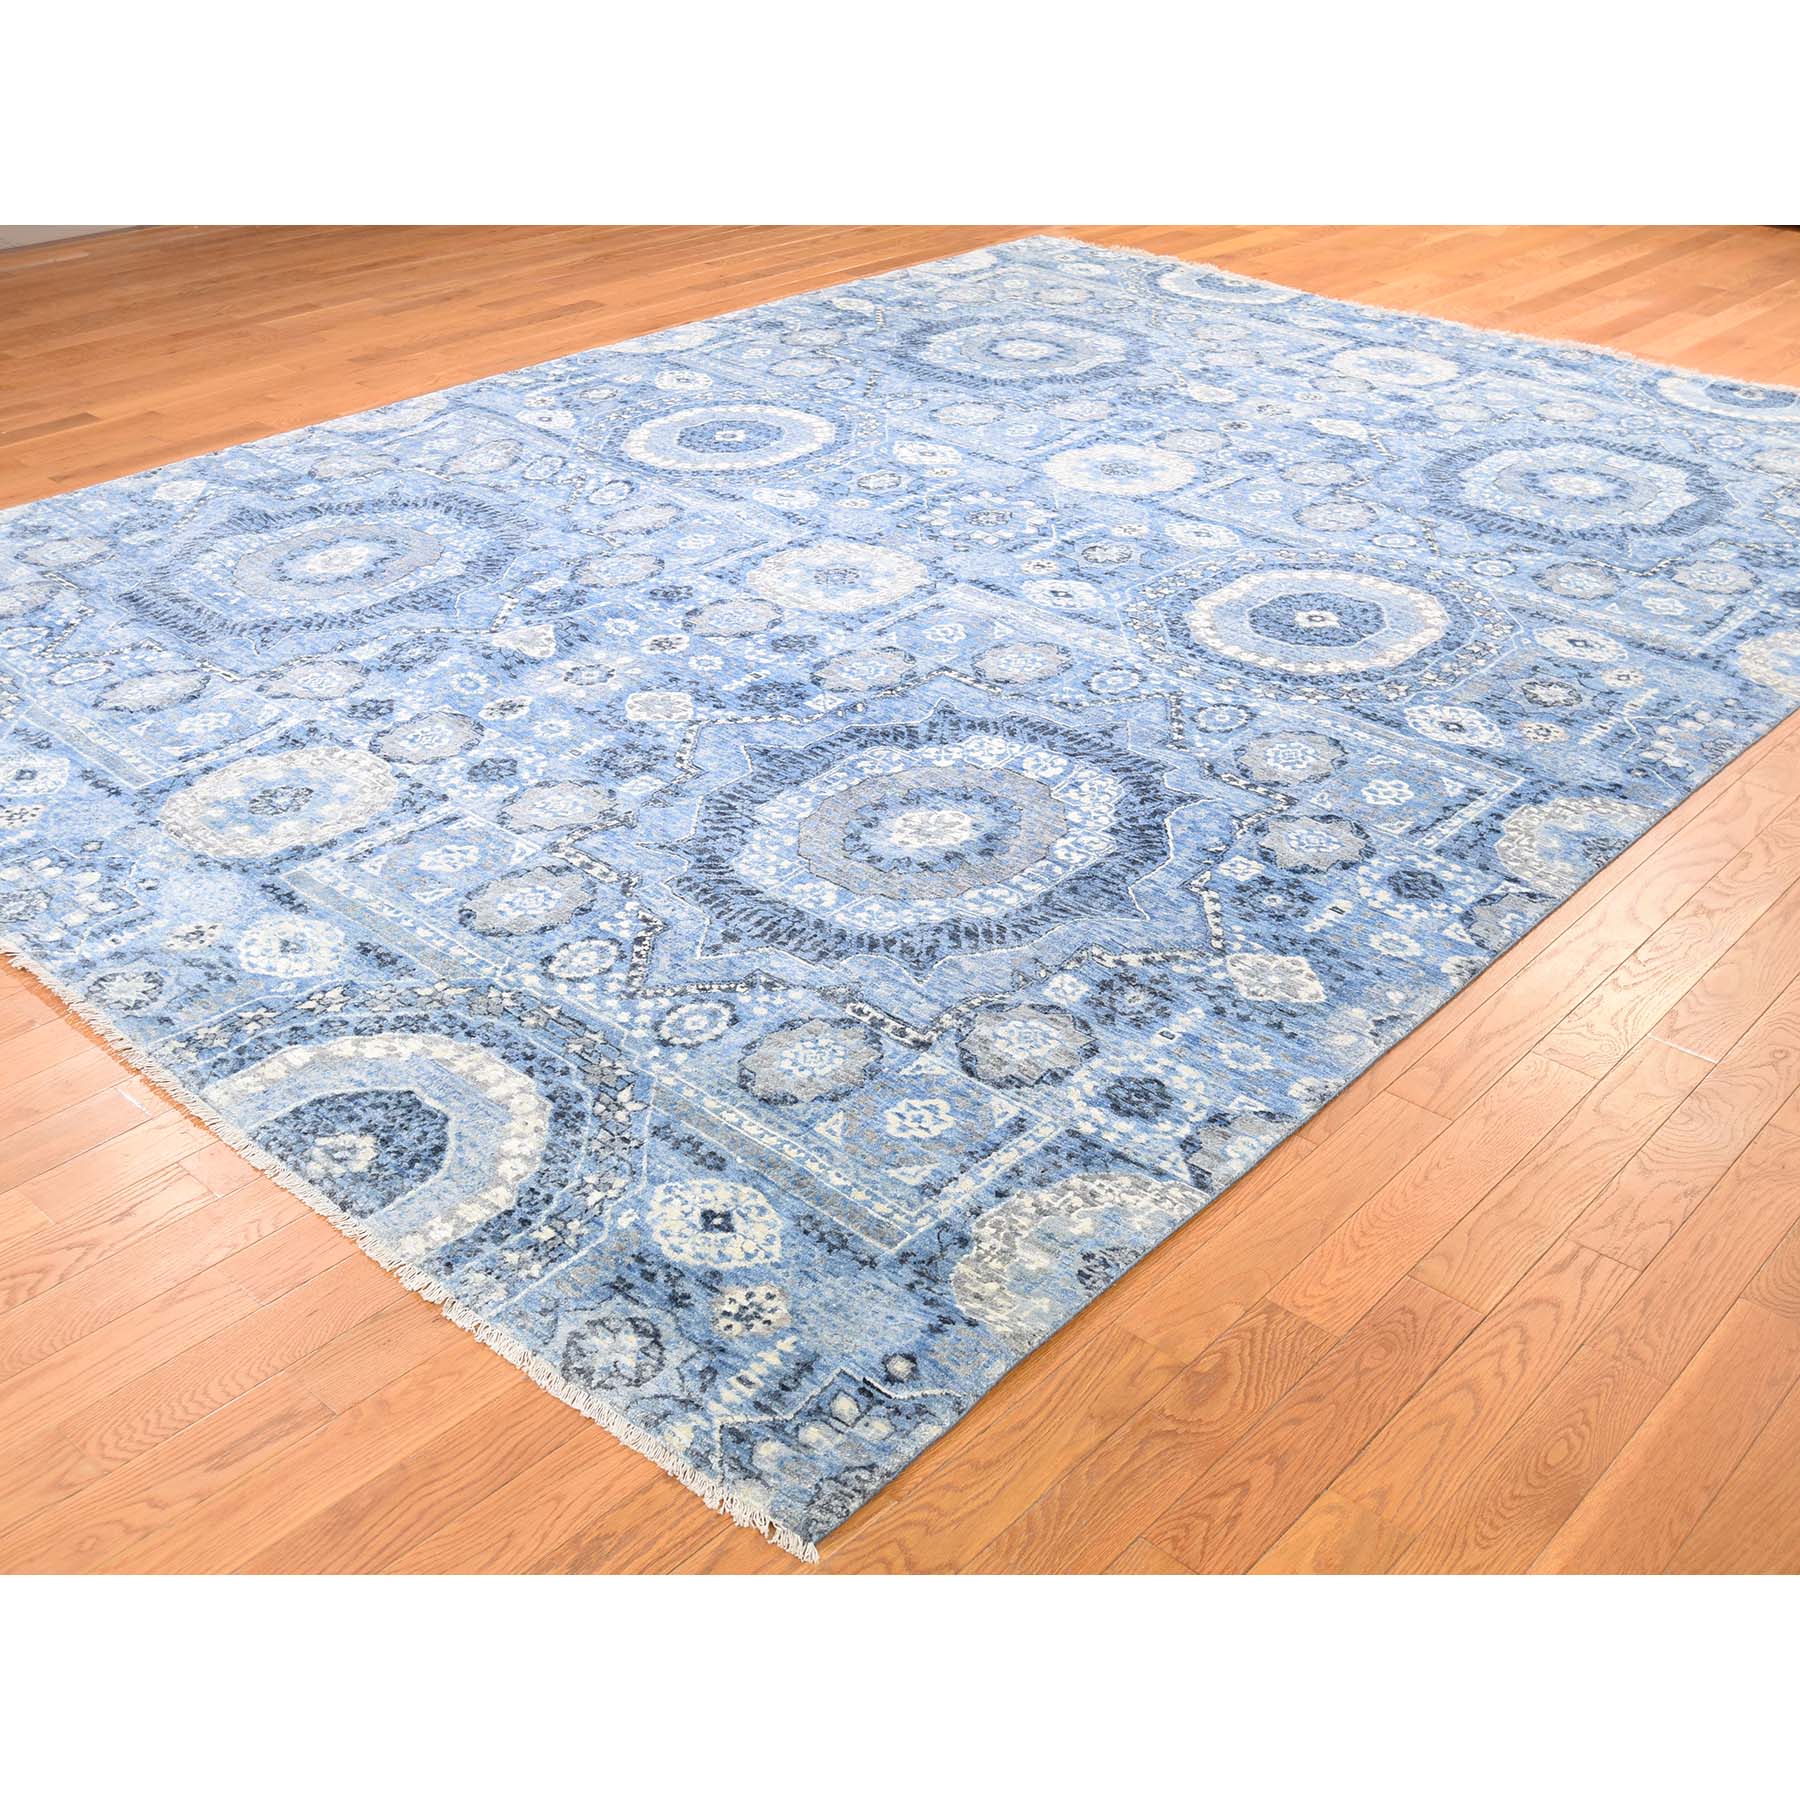 9-1 x12-4  Mamluk Design Pure Silk Antiqued Hand-Knotted Oriental Rug 